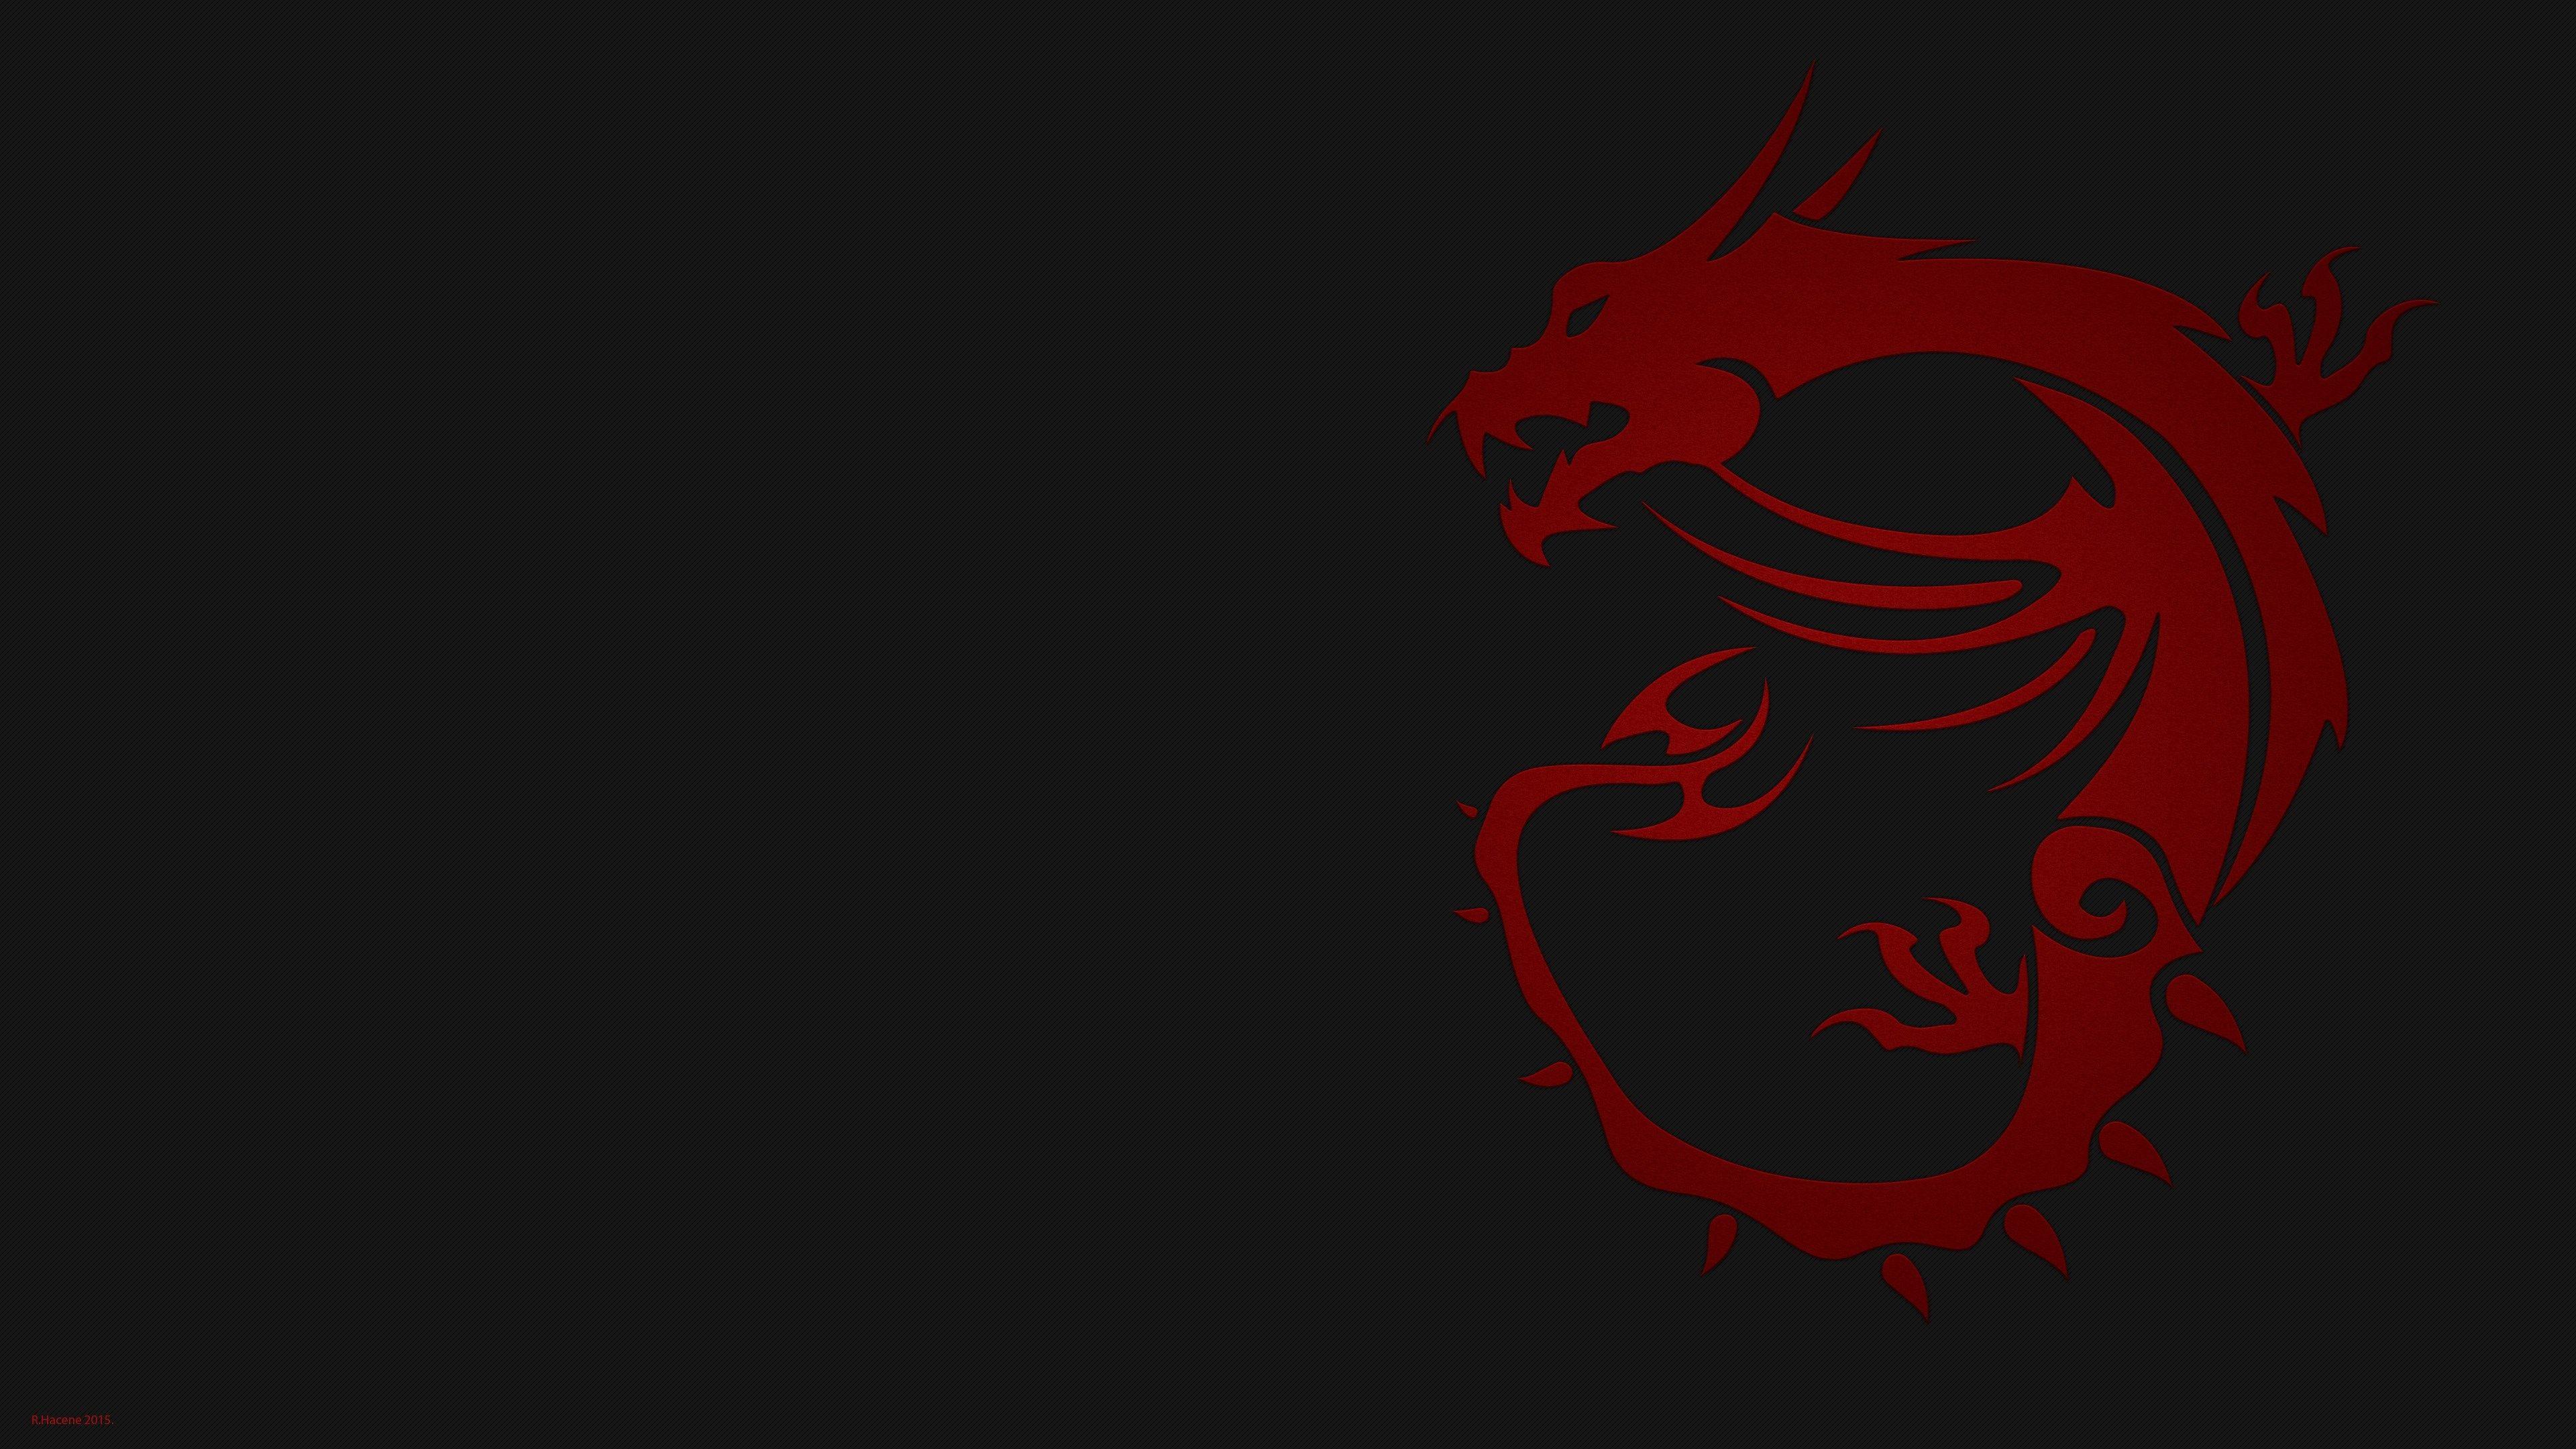 Msi 3840x2160 Wallpapers Top Free Msi 3840x2160 Backgrounds Wallpaperaccess